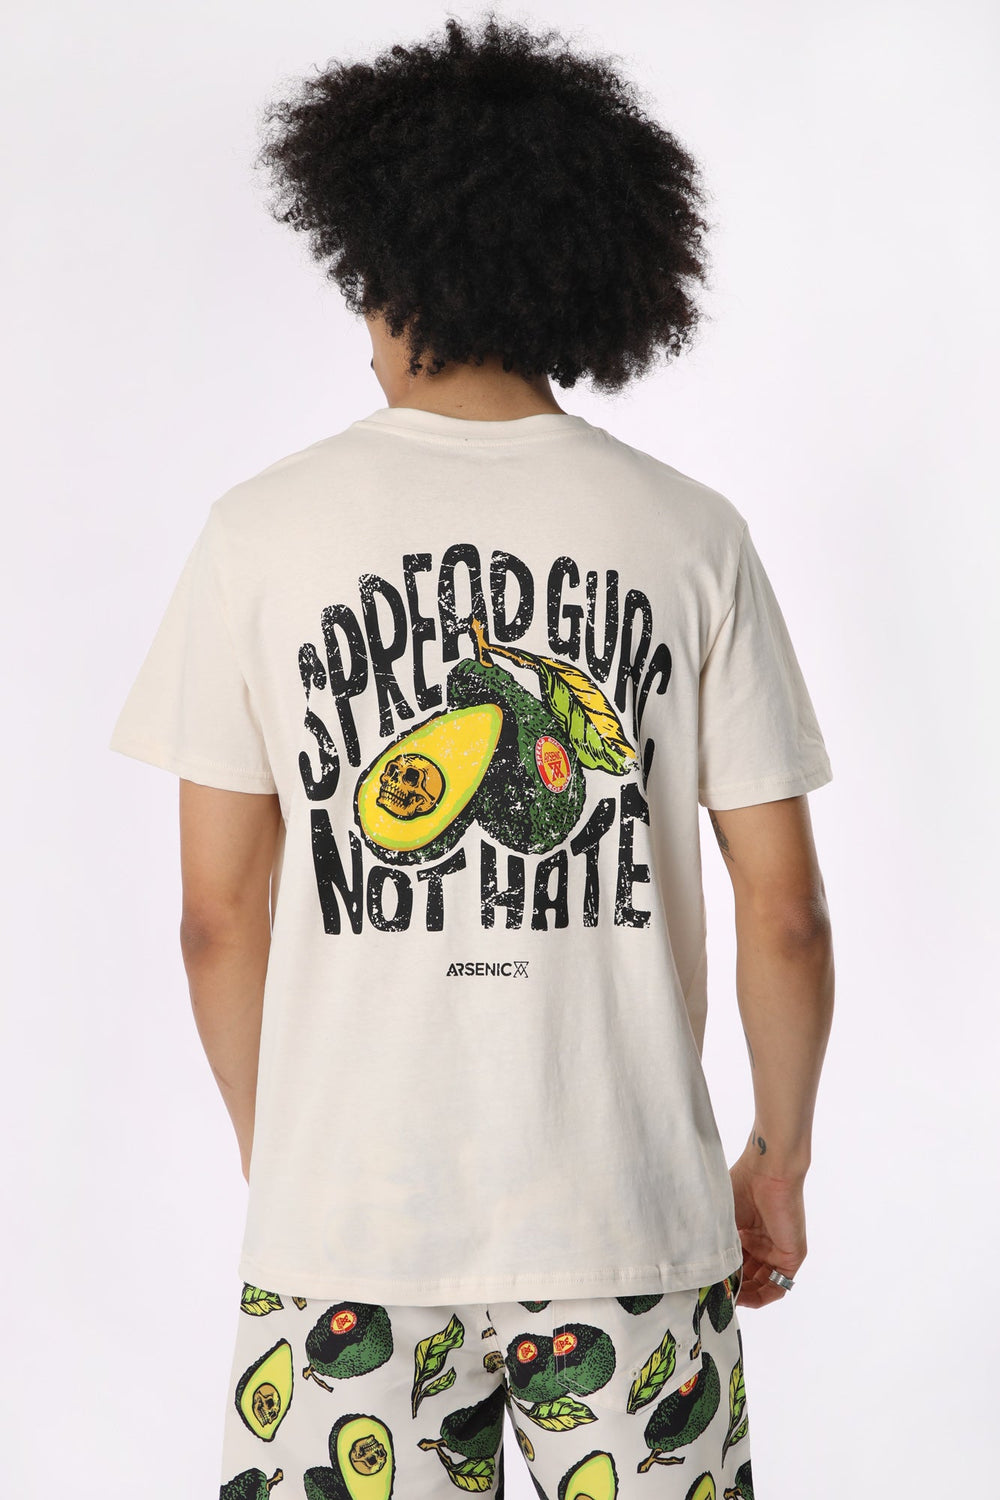 T-Shirt Spread Guac, Not Hate Arsenic Homme T-Shirt Spread Guac, Not Hate Arsenic Homme